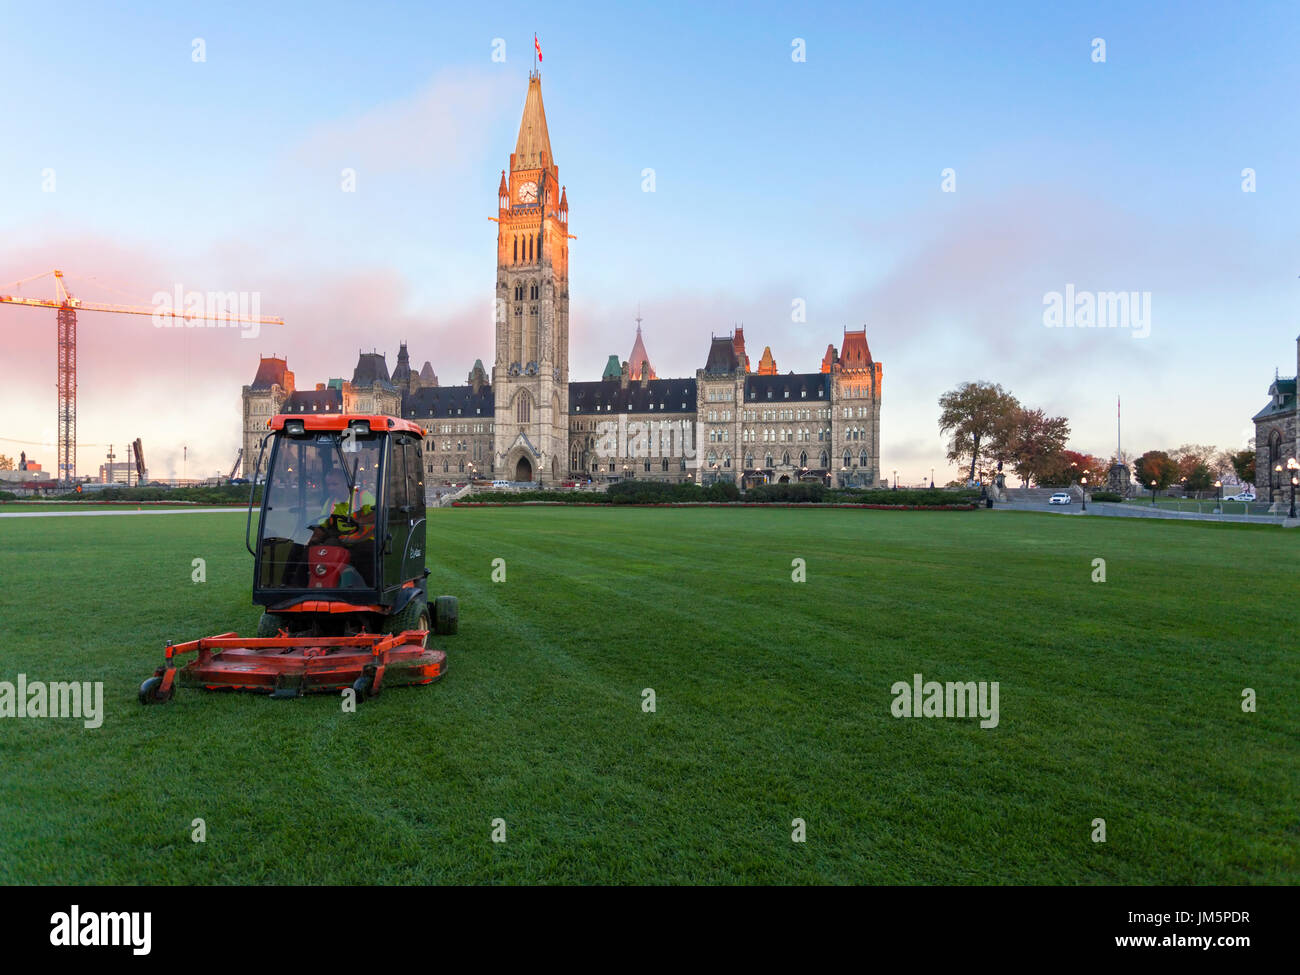 A groundskeeper mowing the lawn in front of Parliament Hill and Centre Block on a riding lawnmower in Ottawa, Ontario, Canada. Stock Photo